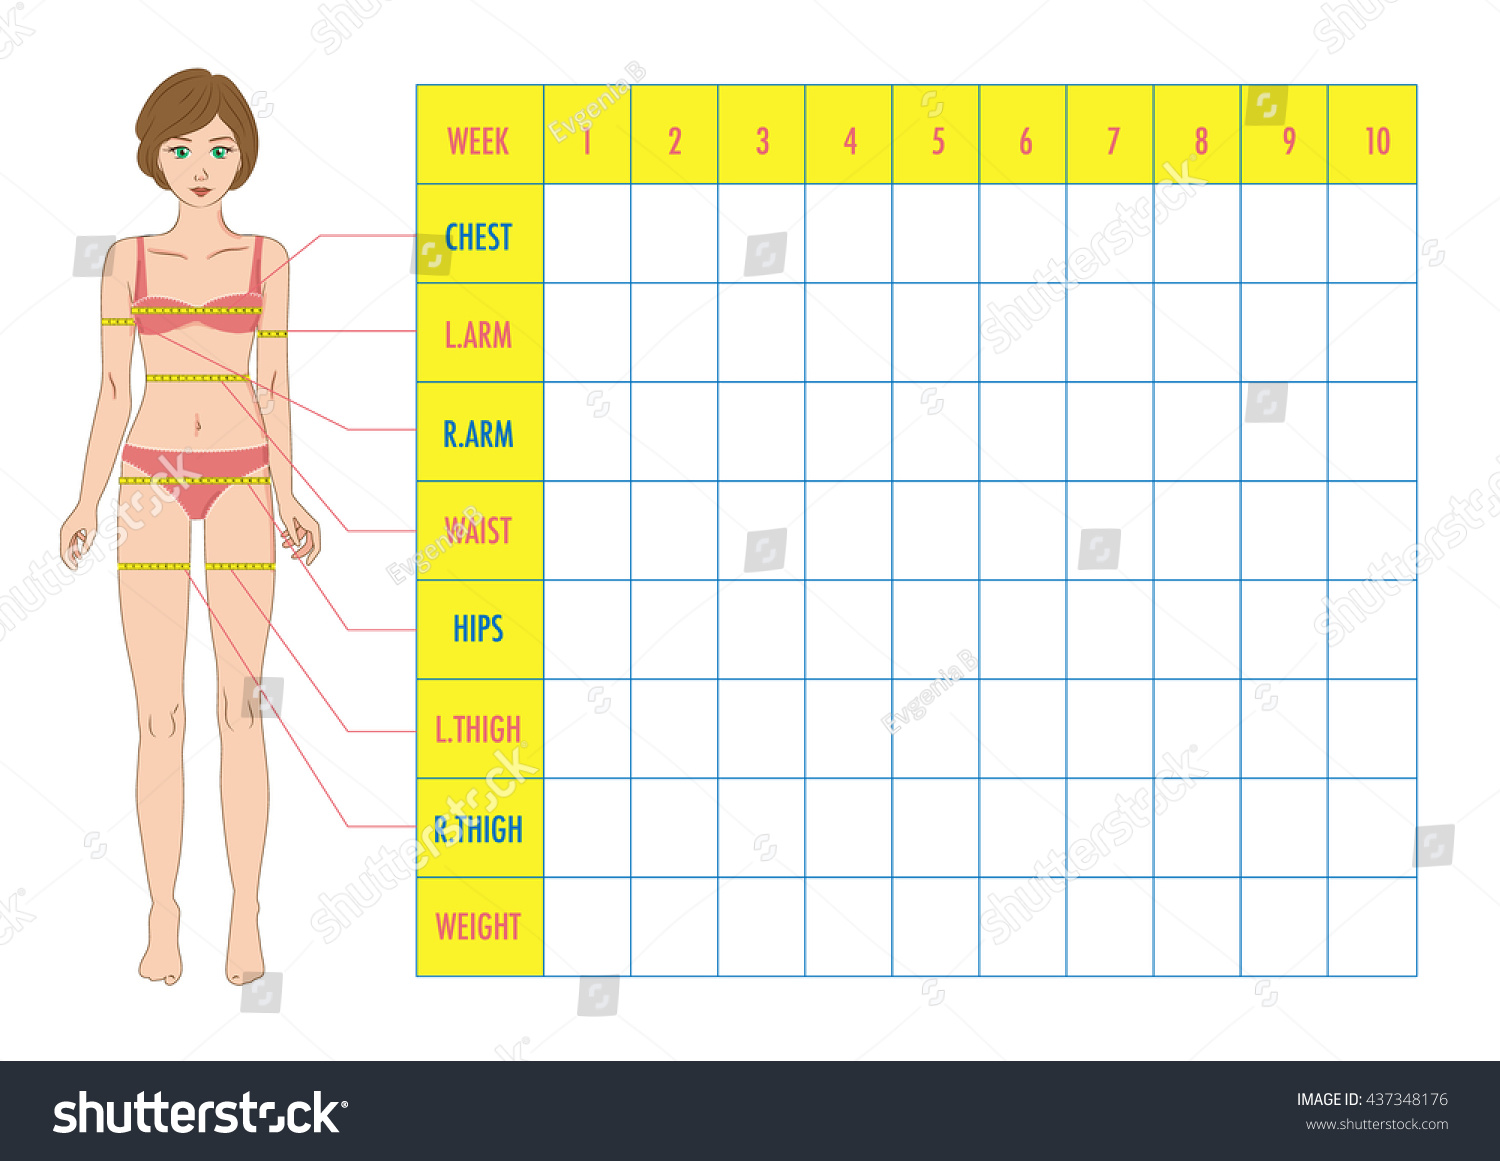 Weight And Waist Size Chart